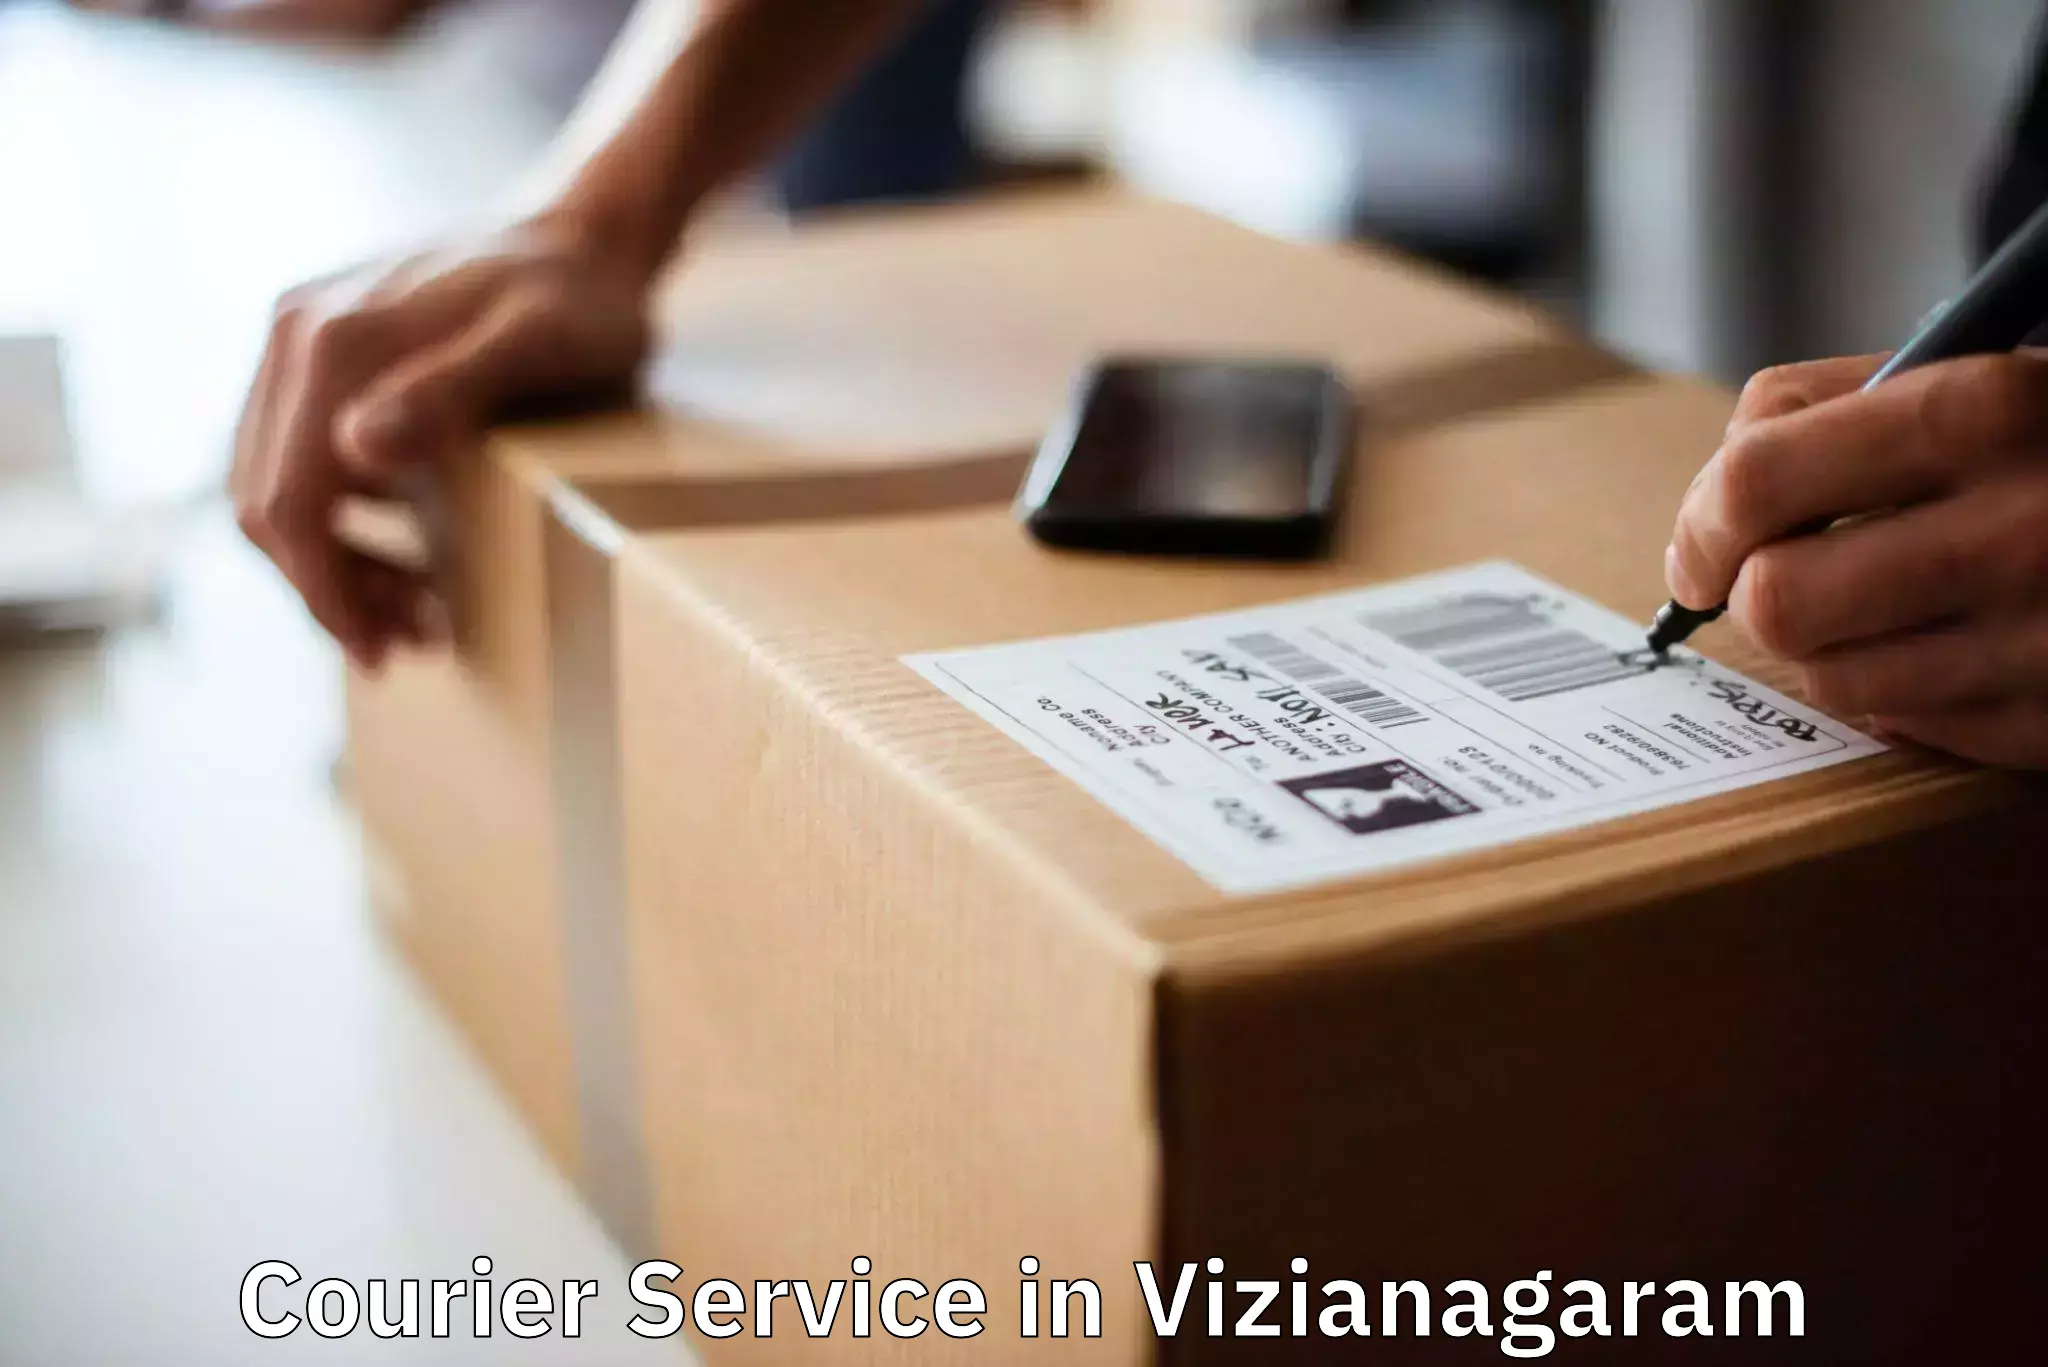 Sustainable shipping practices in Vizianagaram